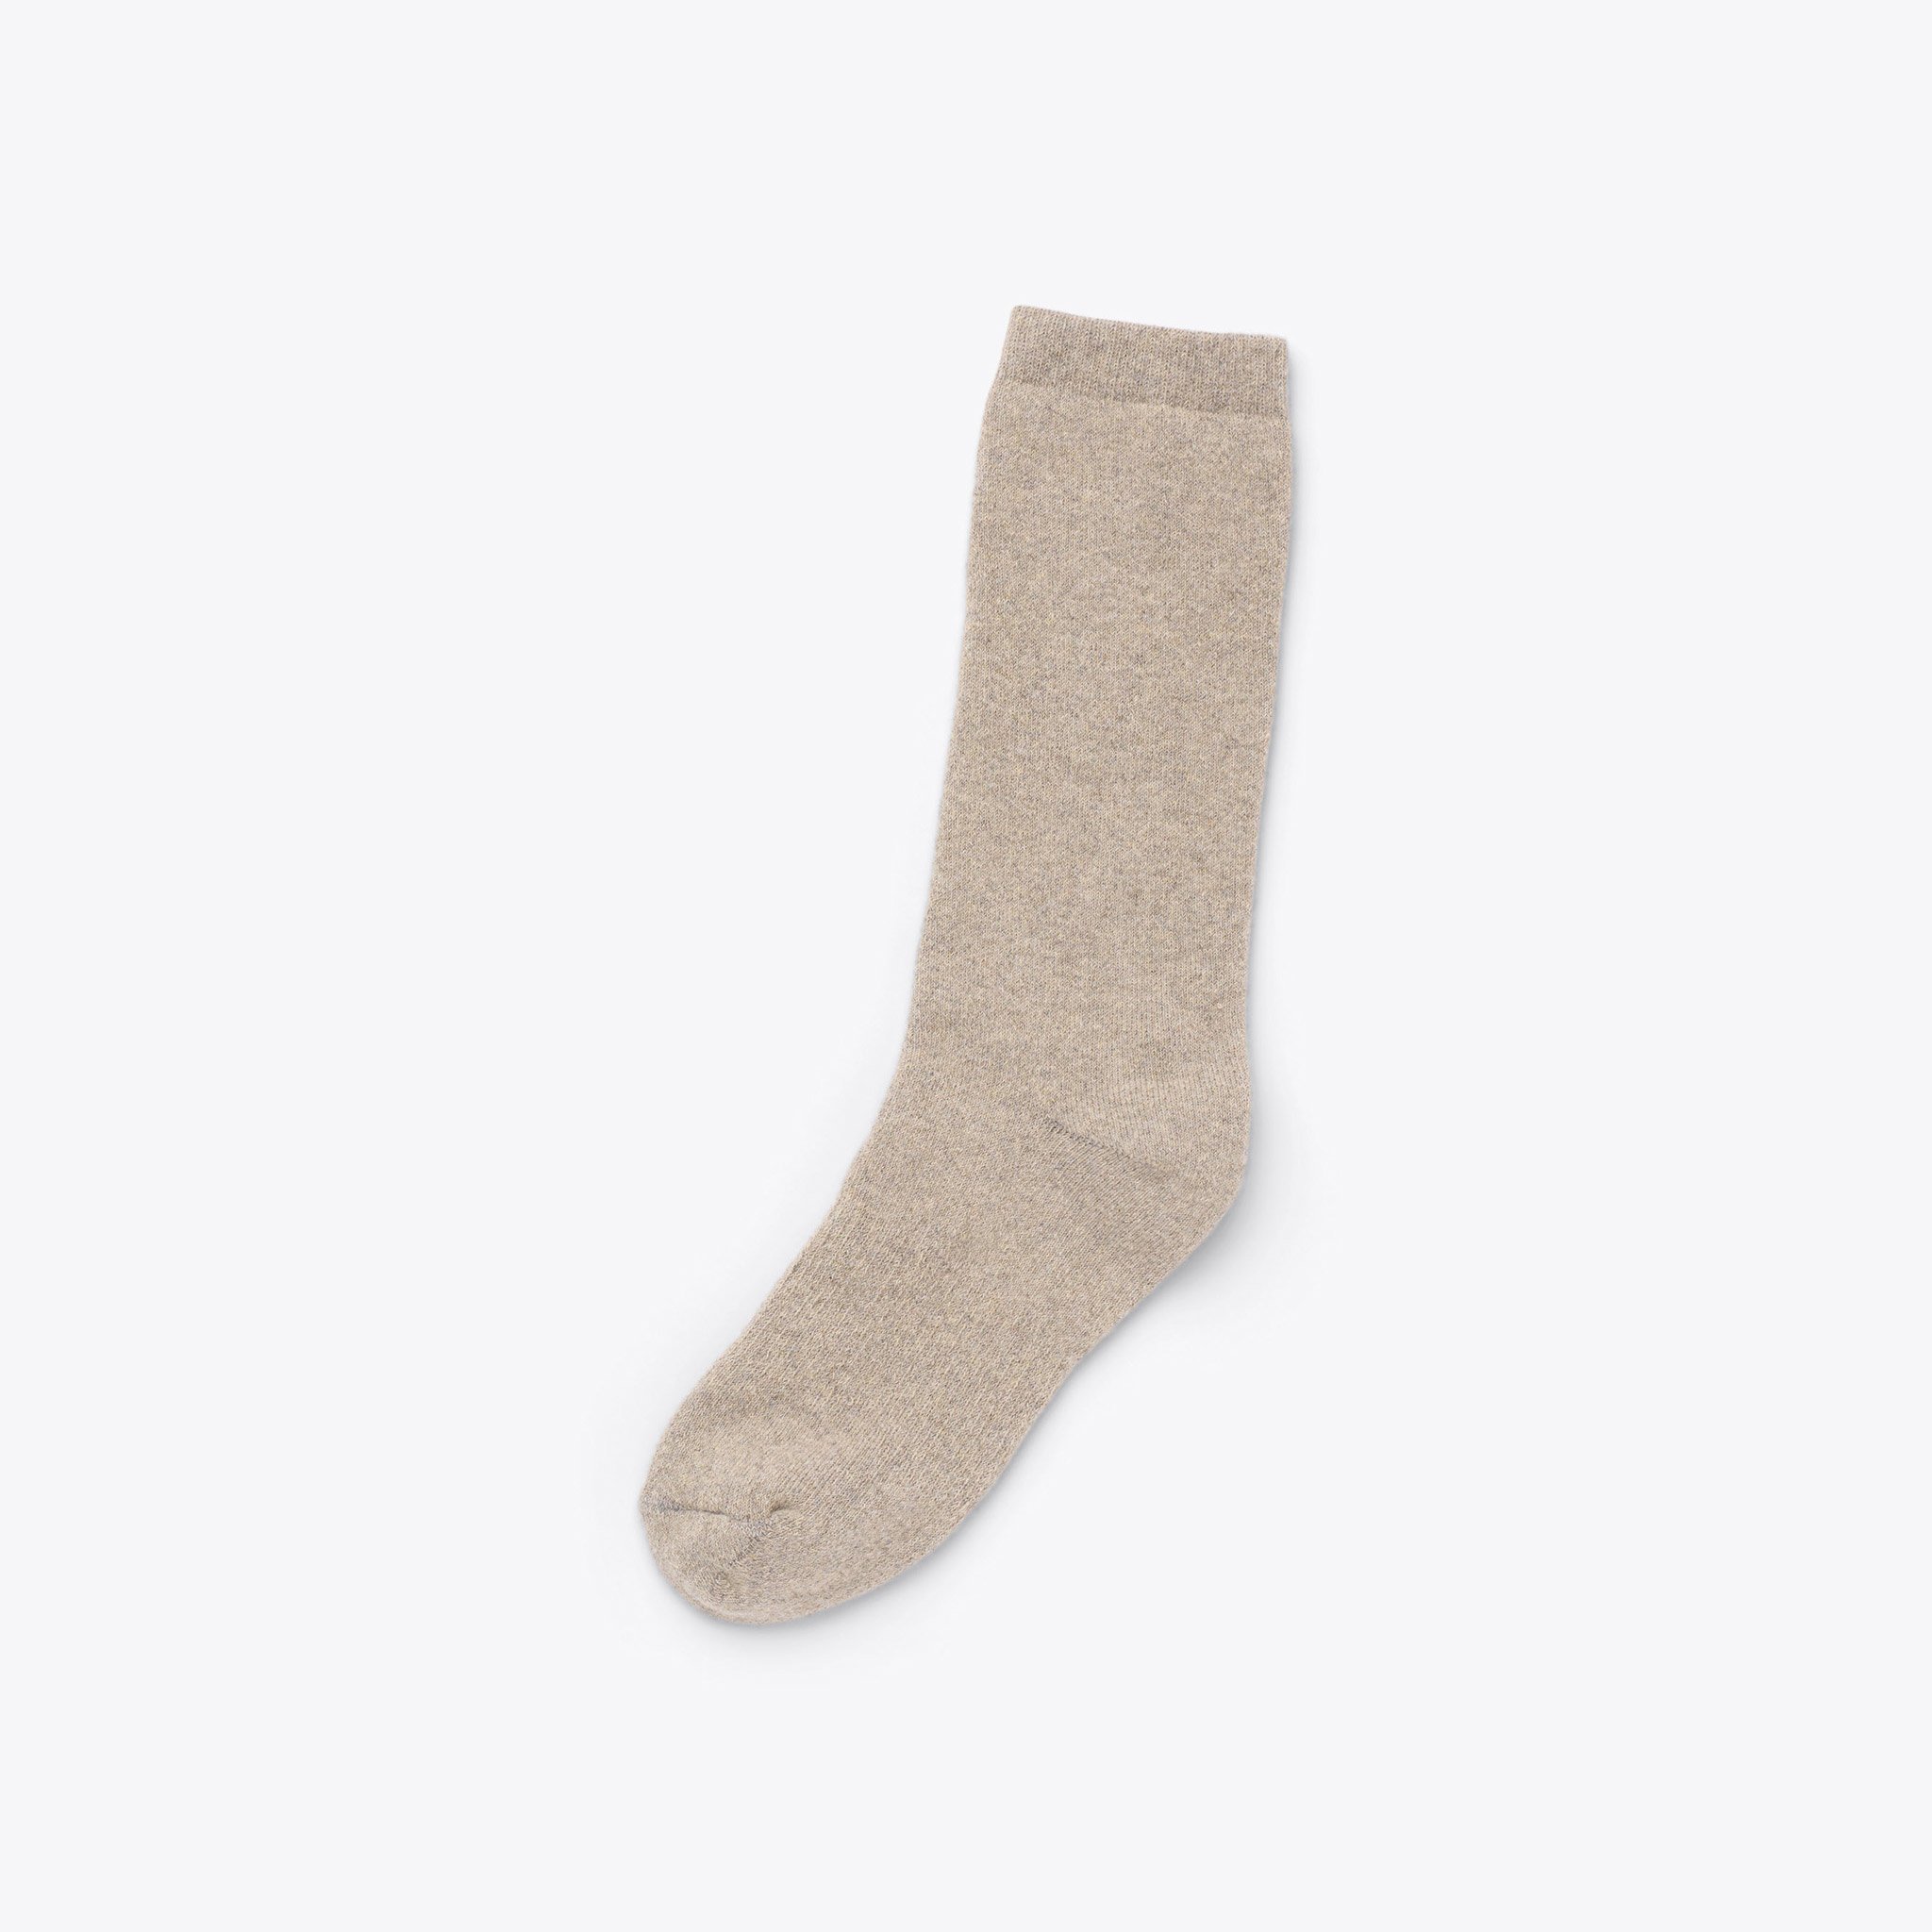 Nisolo Wool Cushion Crew Hiker Sock Khaki - Every Nisolo product is built on the foundation of comfort, function, and design. 